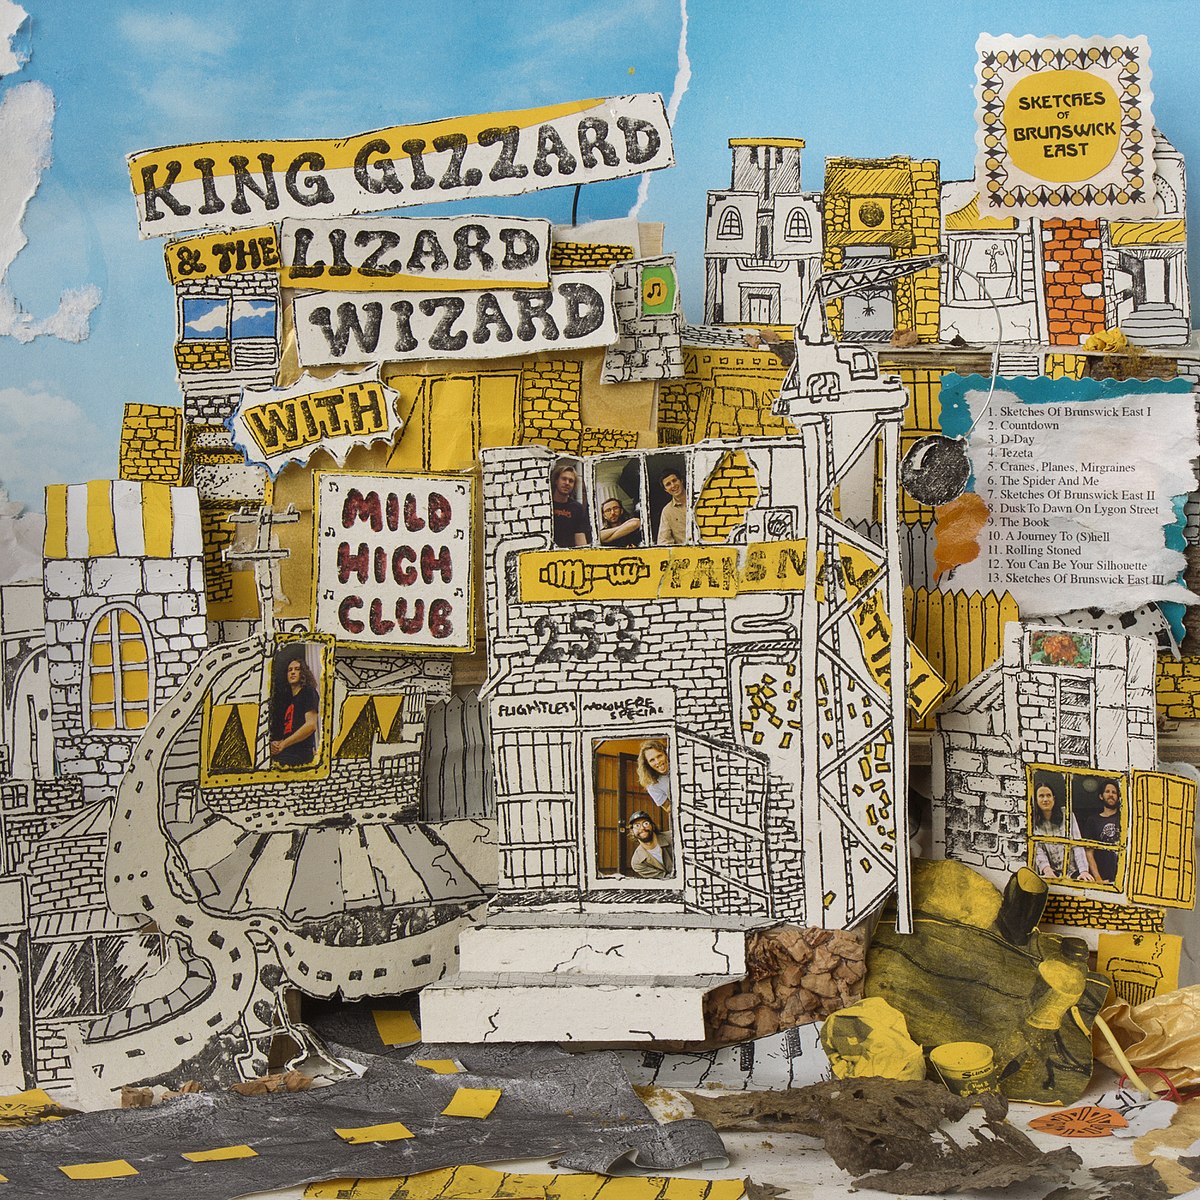 King Gizzard and the Lizard Wizard illustrate images of the place where they record music